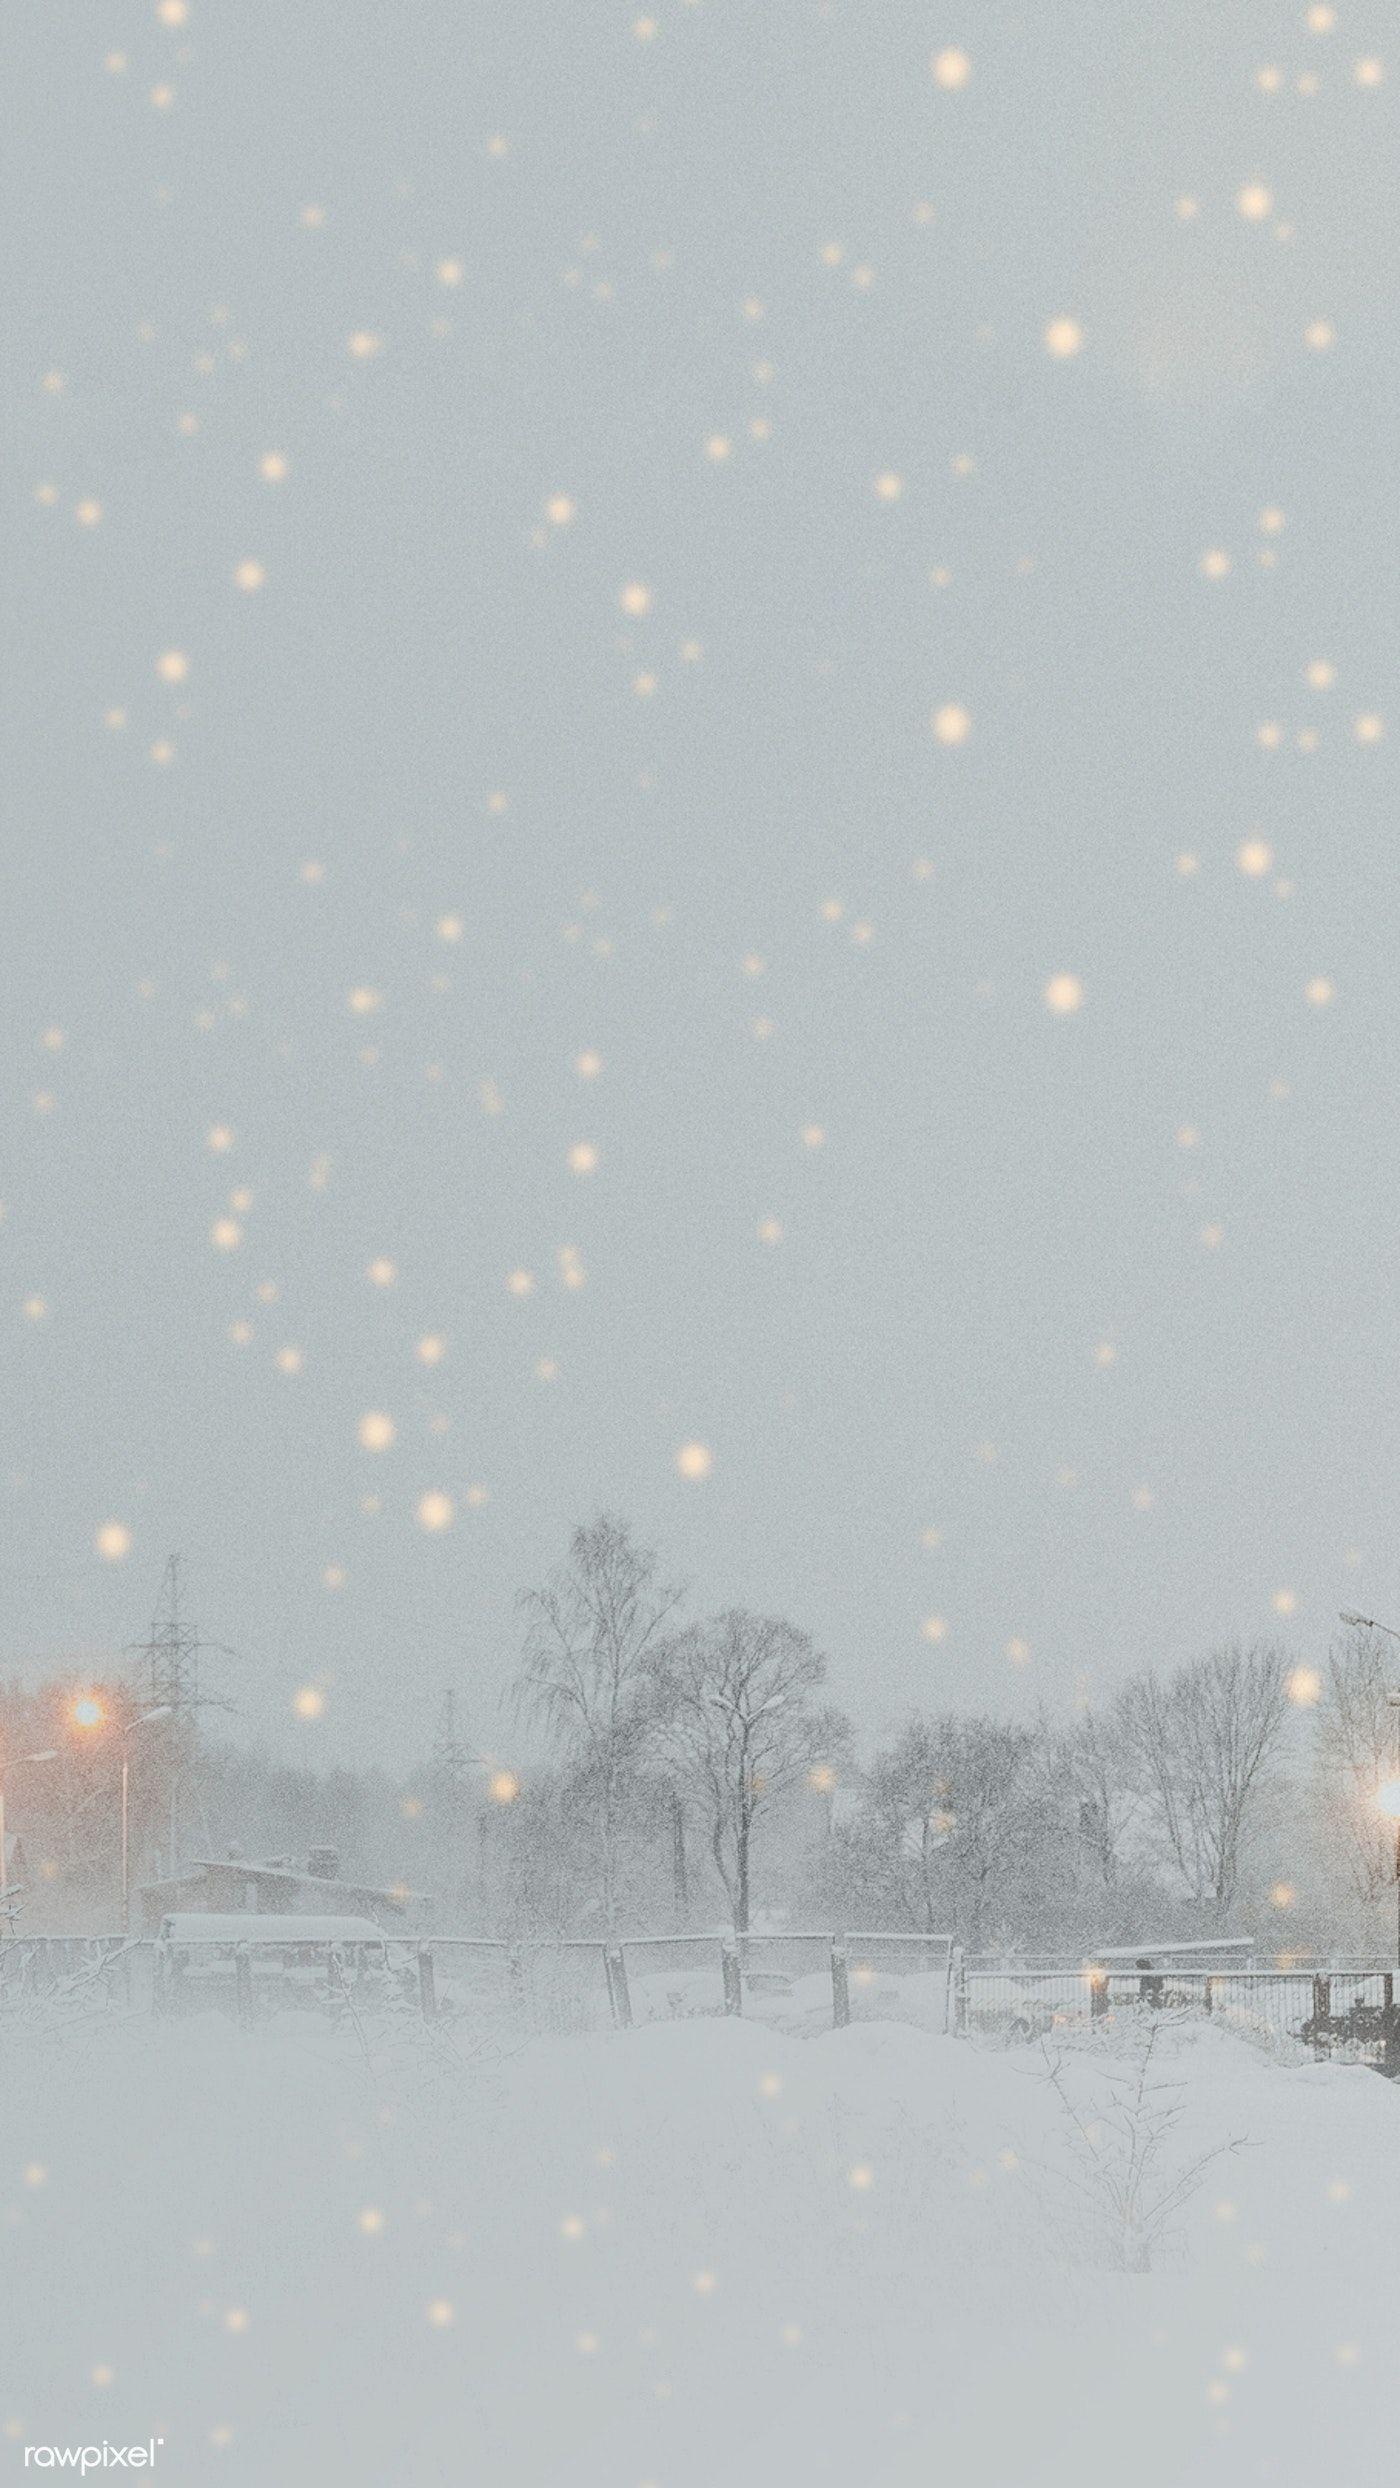 Snowy Park In The Evening Mobile Phone Wallpaper Premium Image